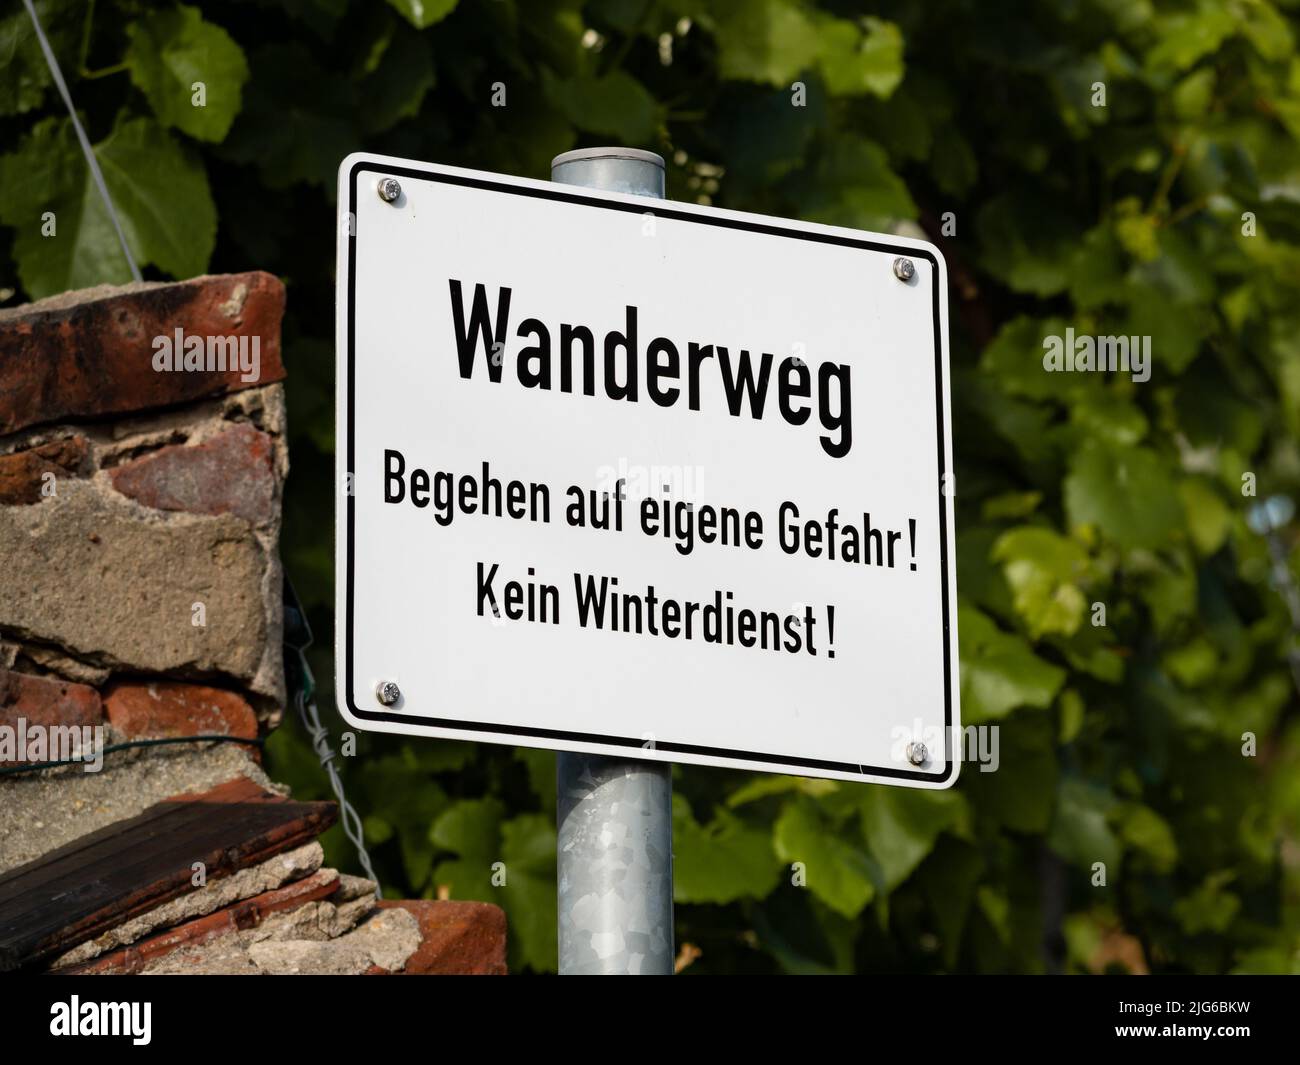 Wanderweg (hiking trail) sign in the nature. The text in German language says the use of the footpath is at one's own risk without winter clearance. Stock Photo